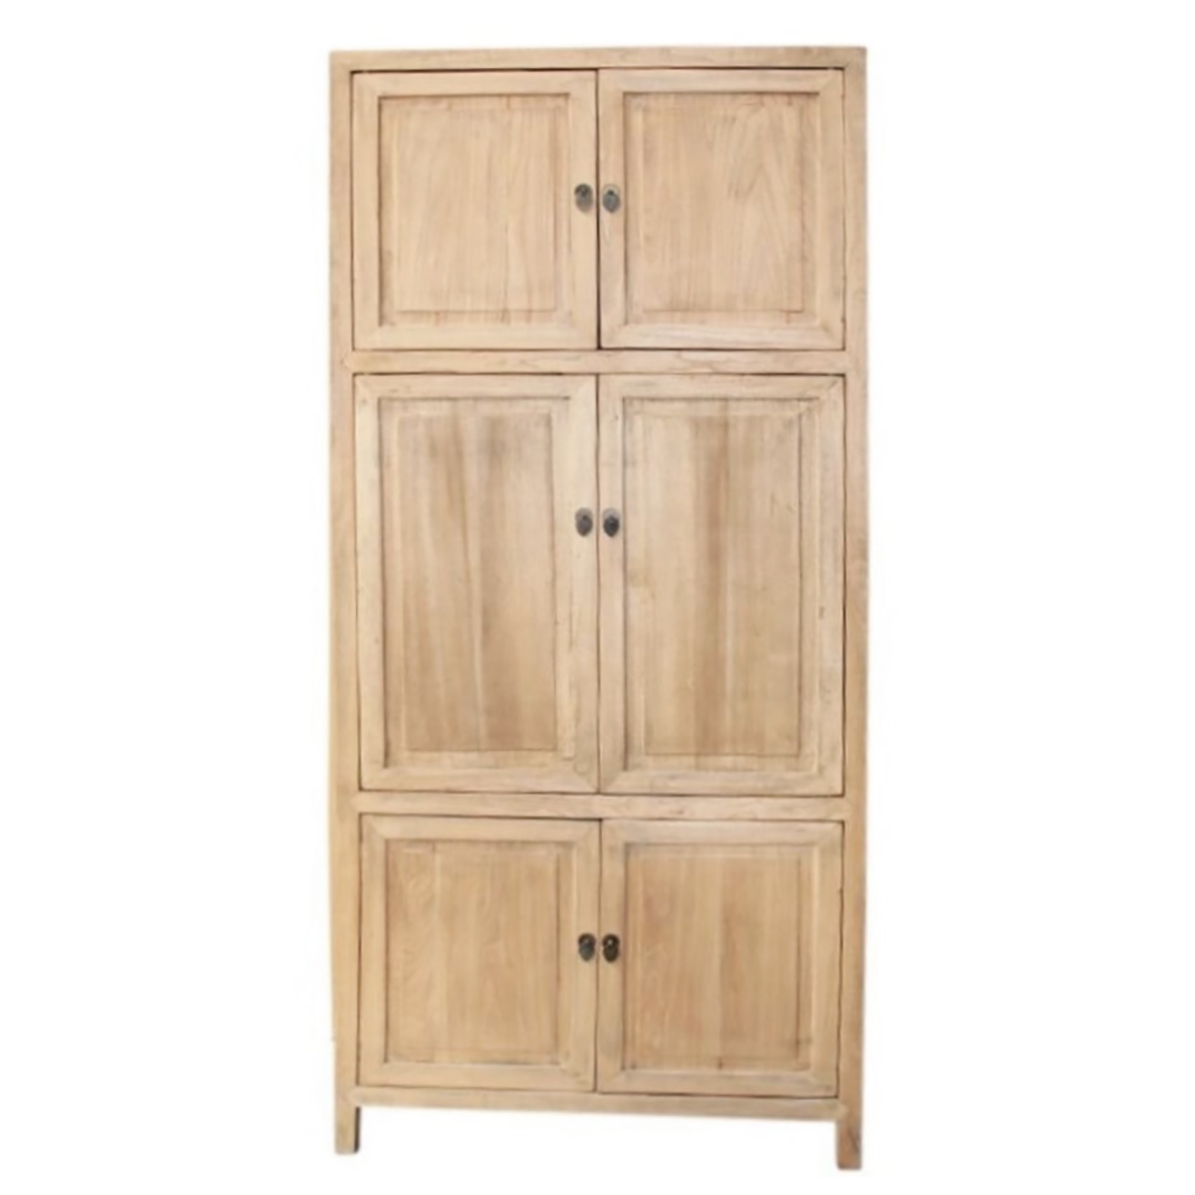 COMPEN HIGH CABINET 